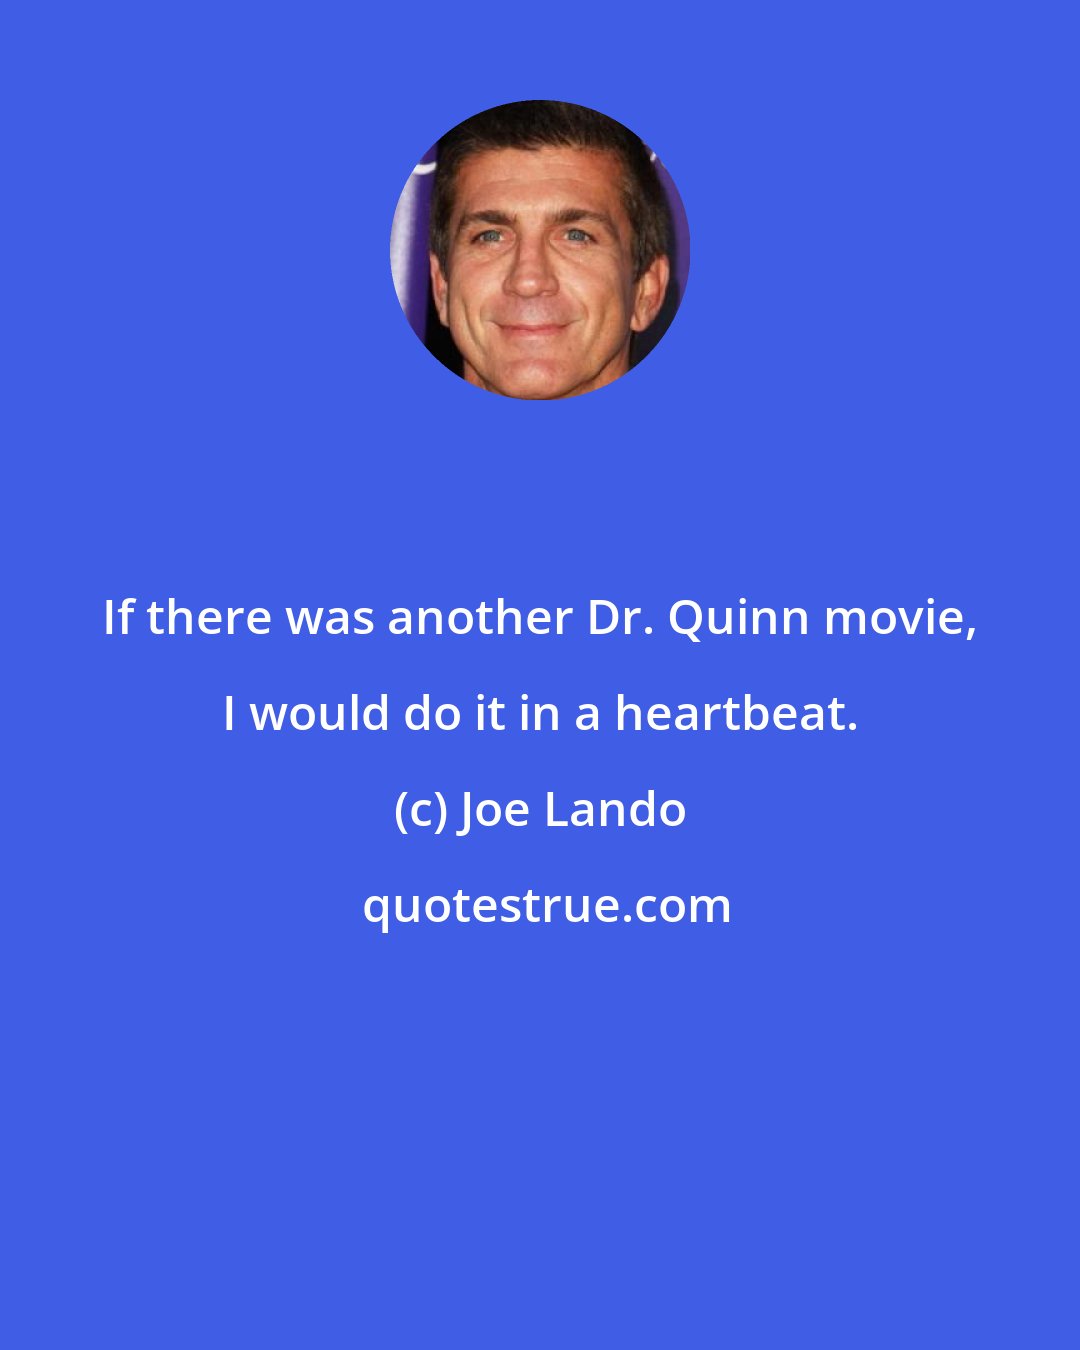 Joe Lando: If there was another Dr. Quinn movie, I would do it in a heartbeat.